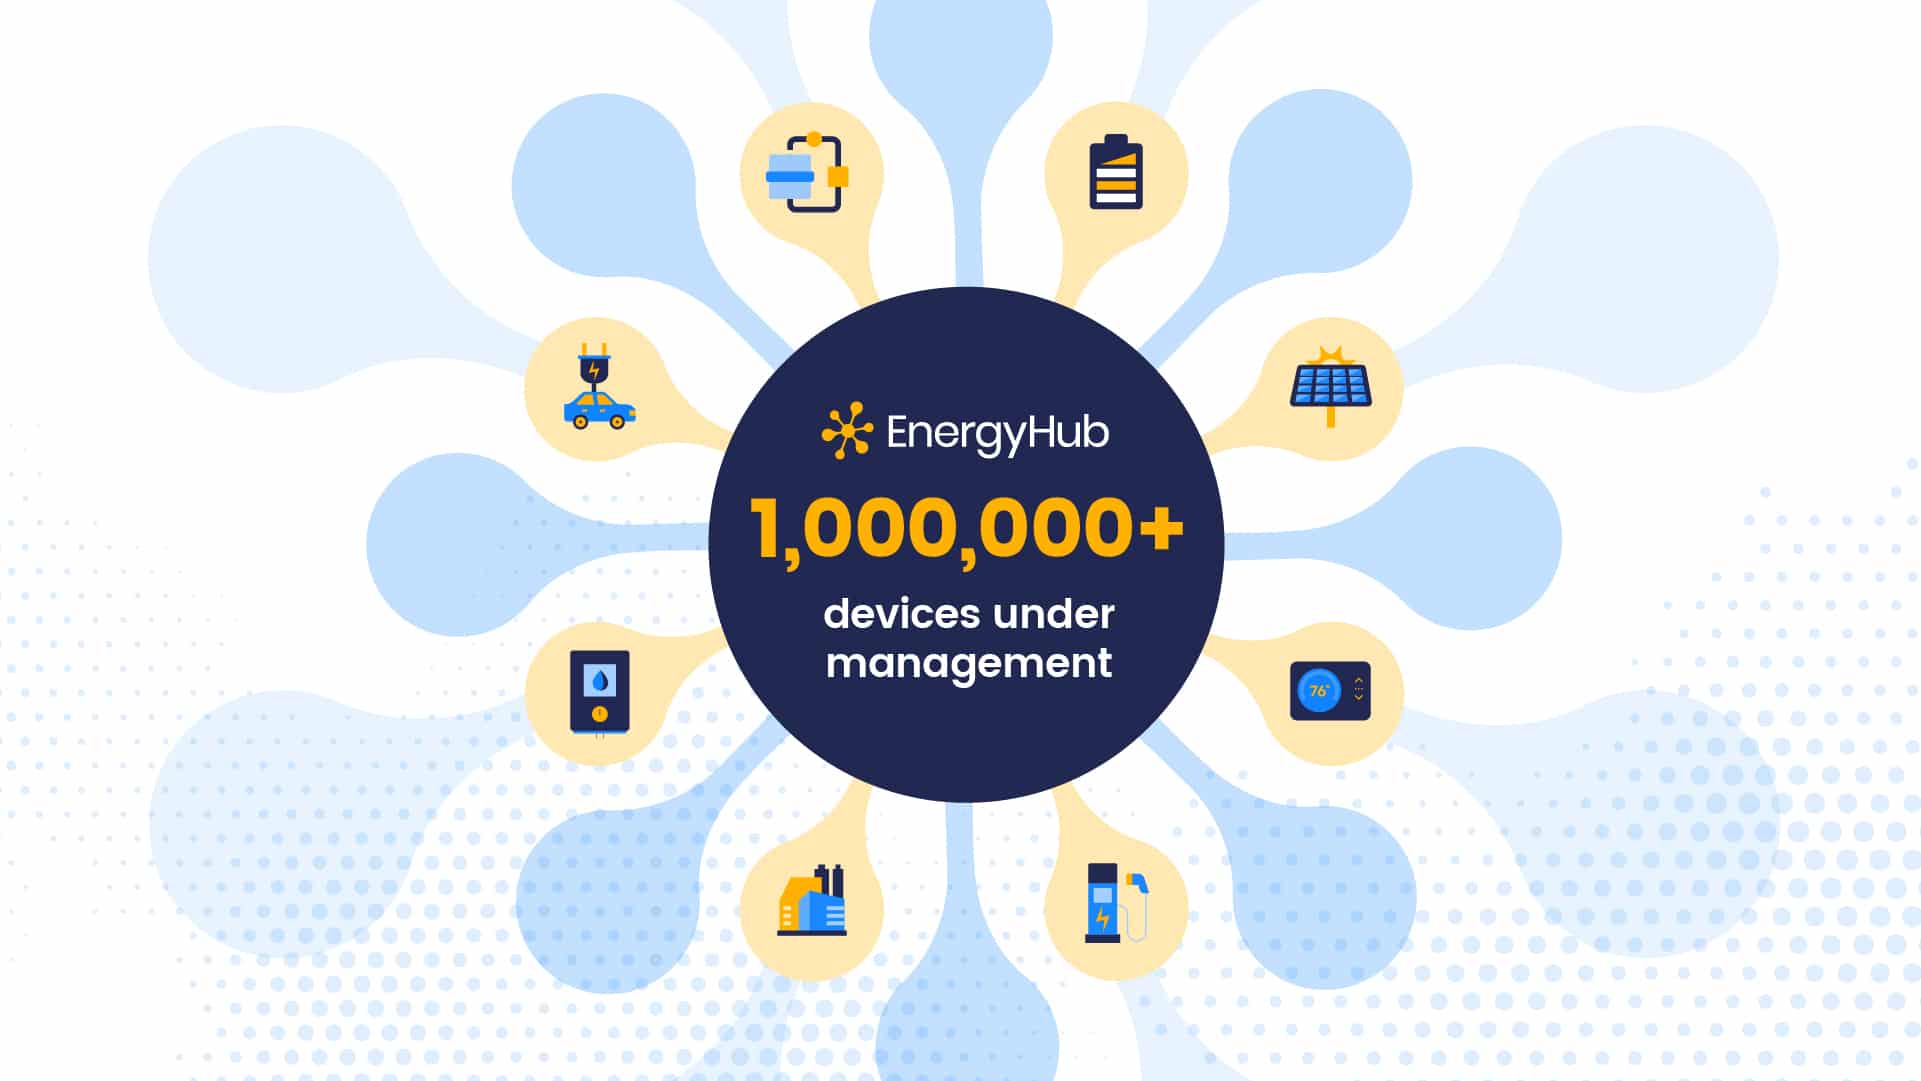 EnergyHub becomes the first DERMS to exceed 1MM devices under management